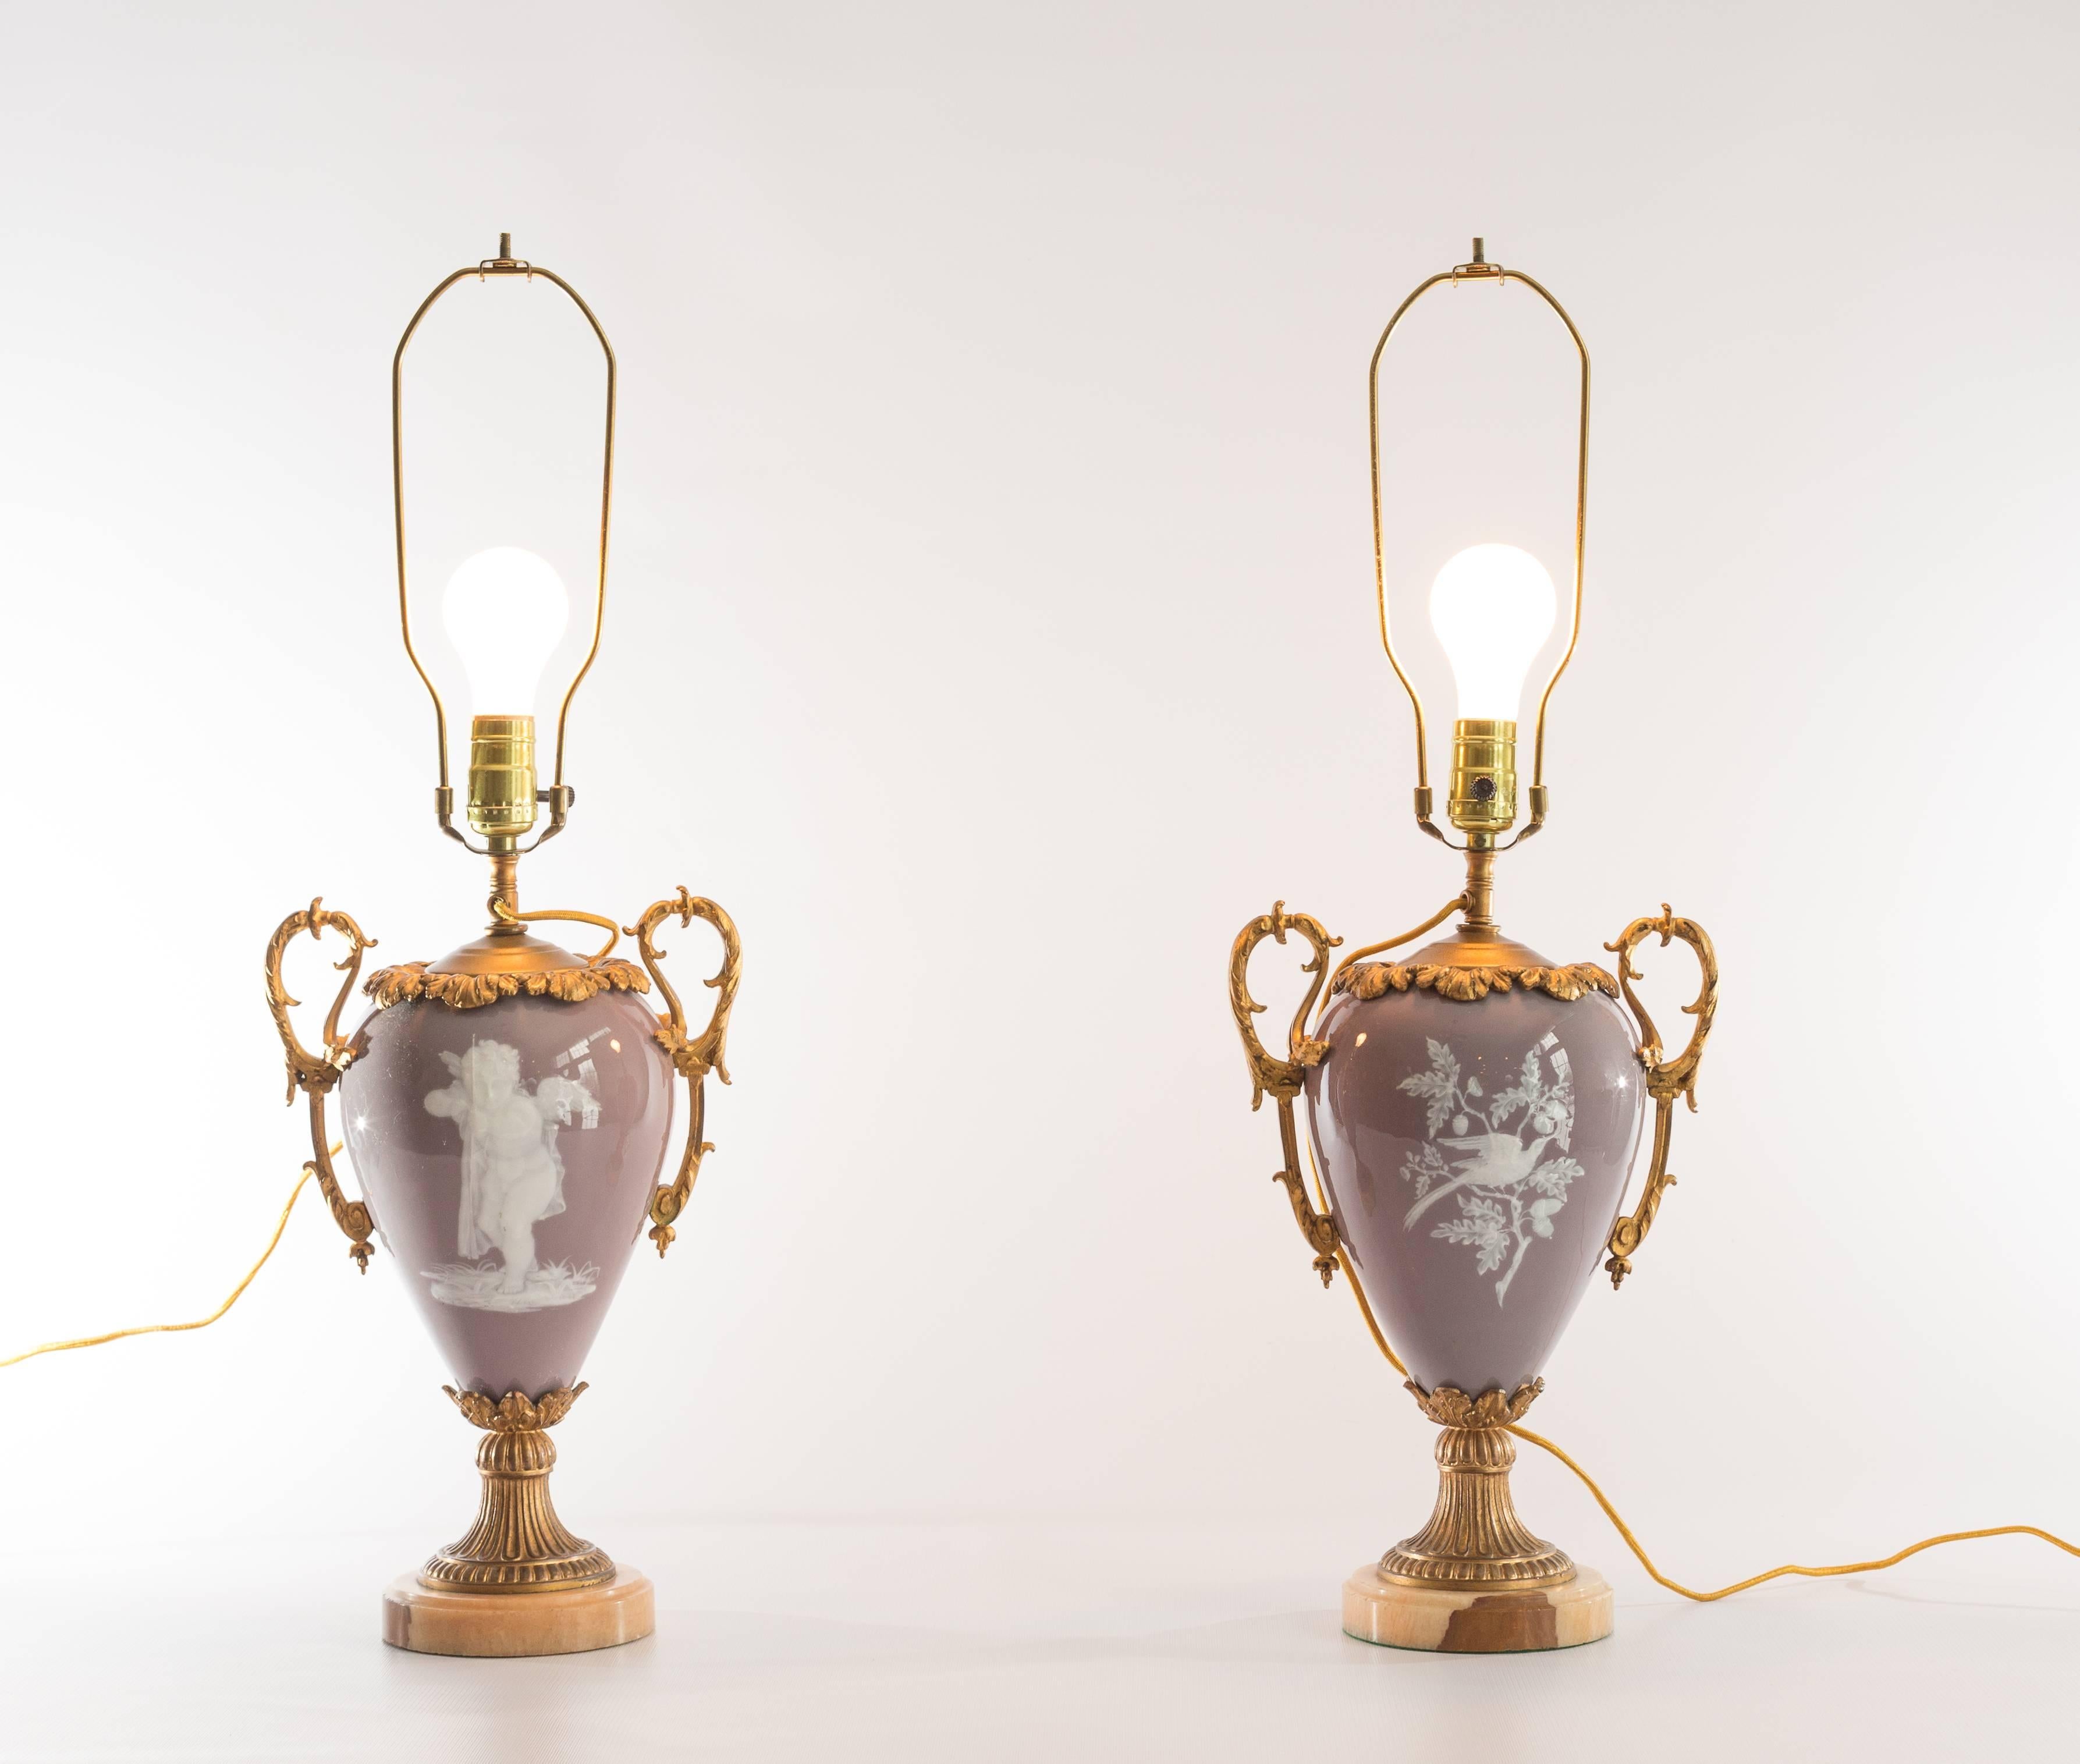 Pair of lavender Pate-Sur-Pate ceramic lamps with cupid or bird design, bronze trim handles, marble bases and silk shades, circa 1930. Measures: 10x21